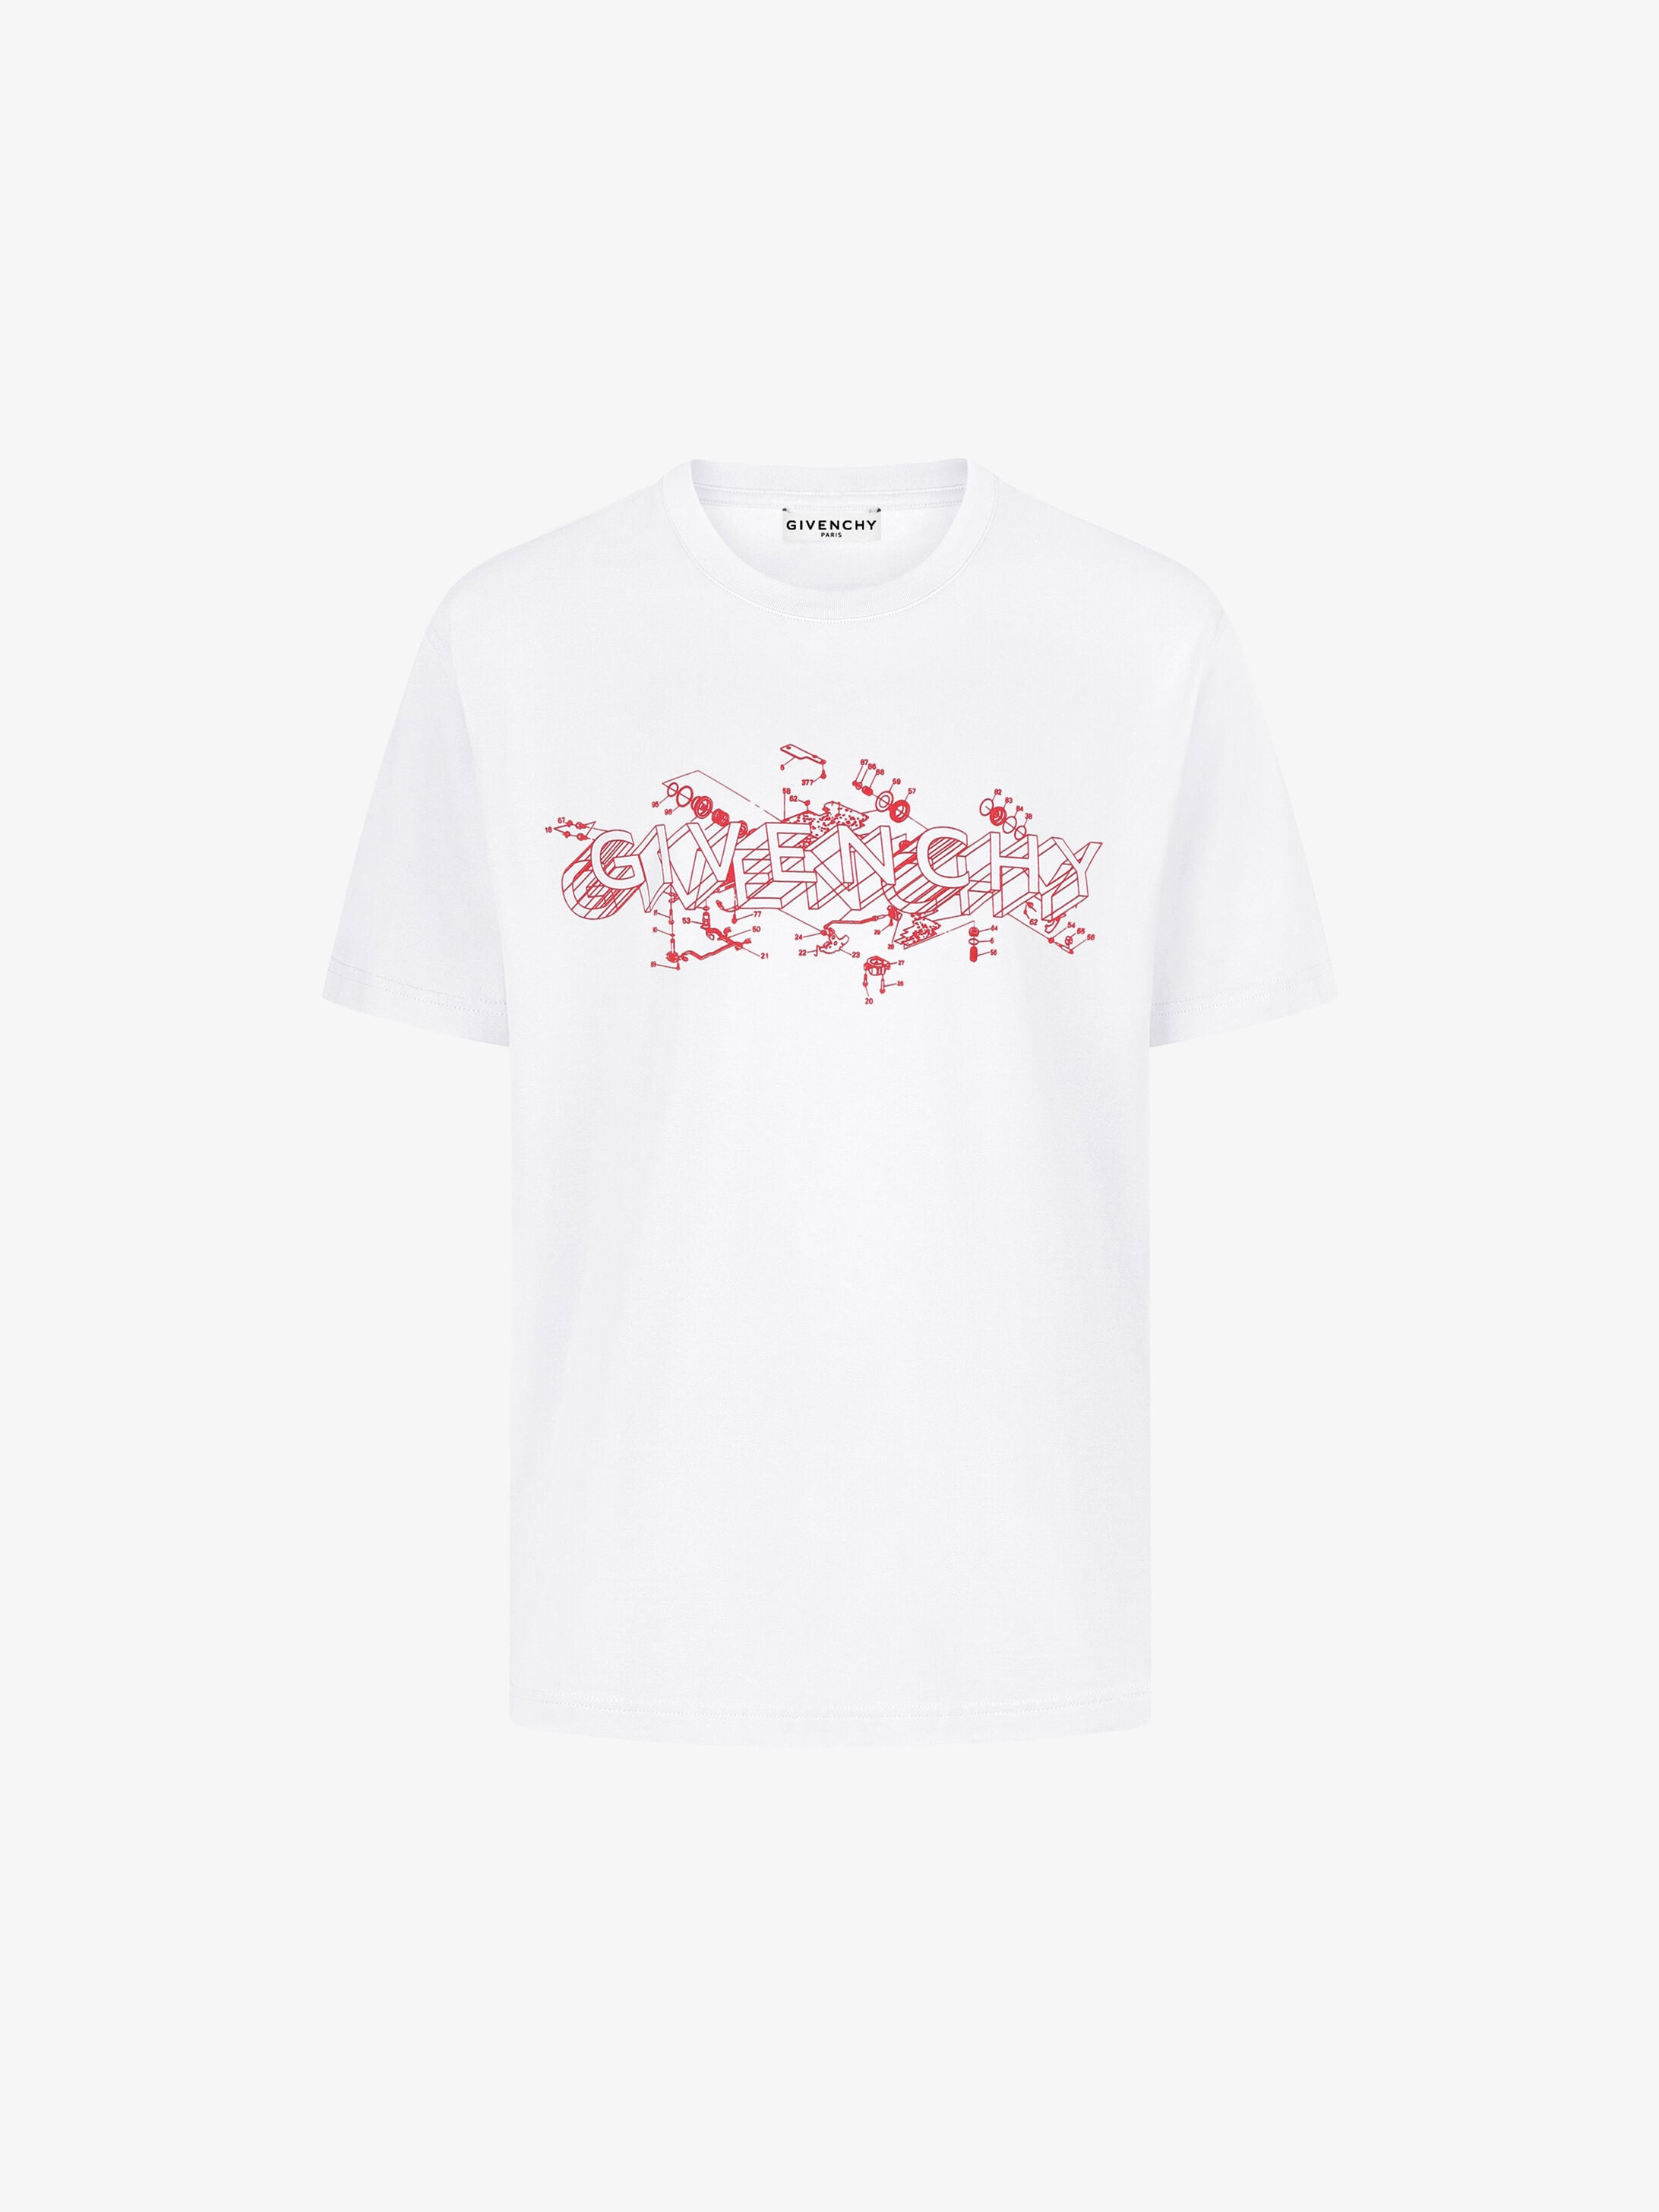 givenchy t shirt price in india